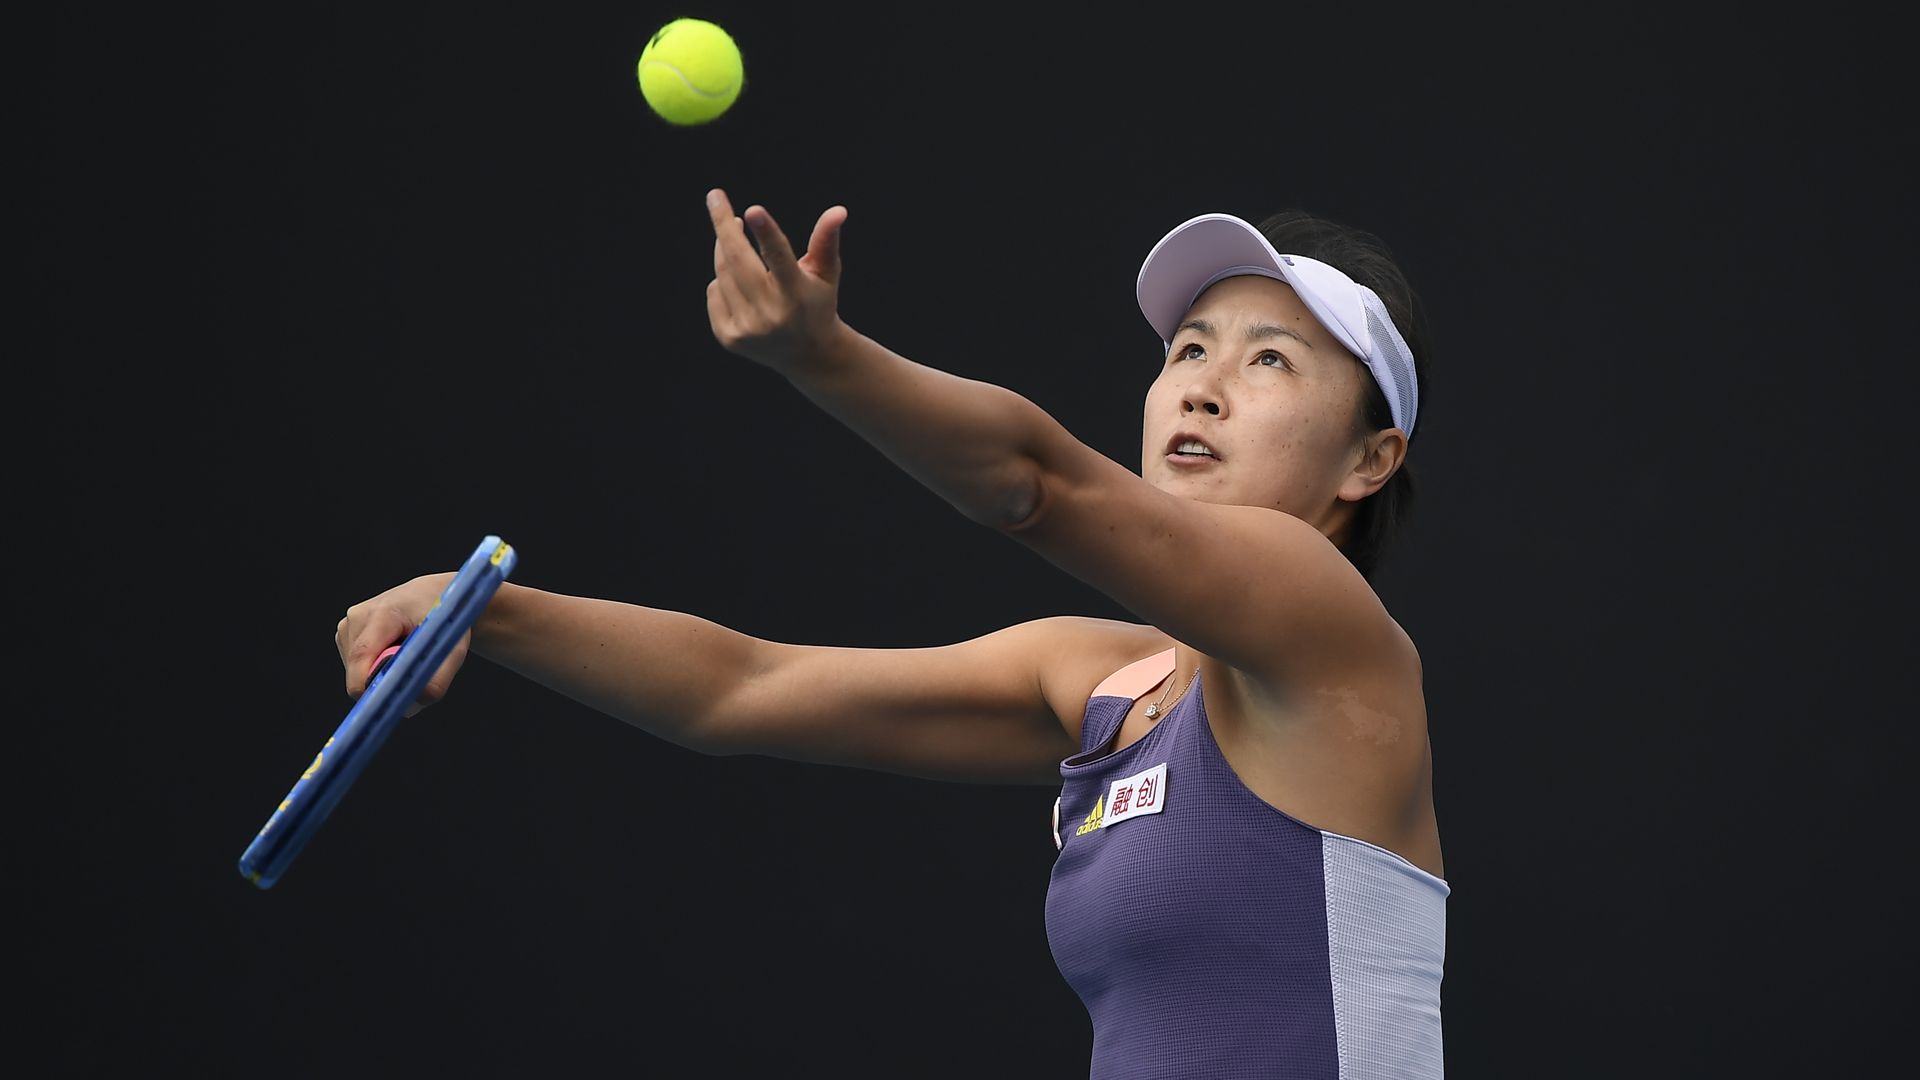  Shuai Peng of China in action during a Women's Singles first round match at the 2020 Australian Open at Melbourne Park on January 21, 2020 in Melbourne, Australia.